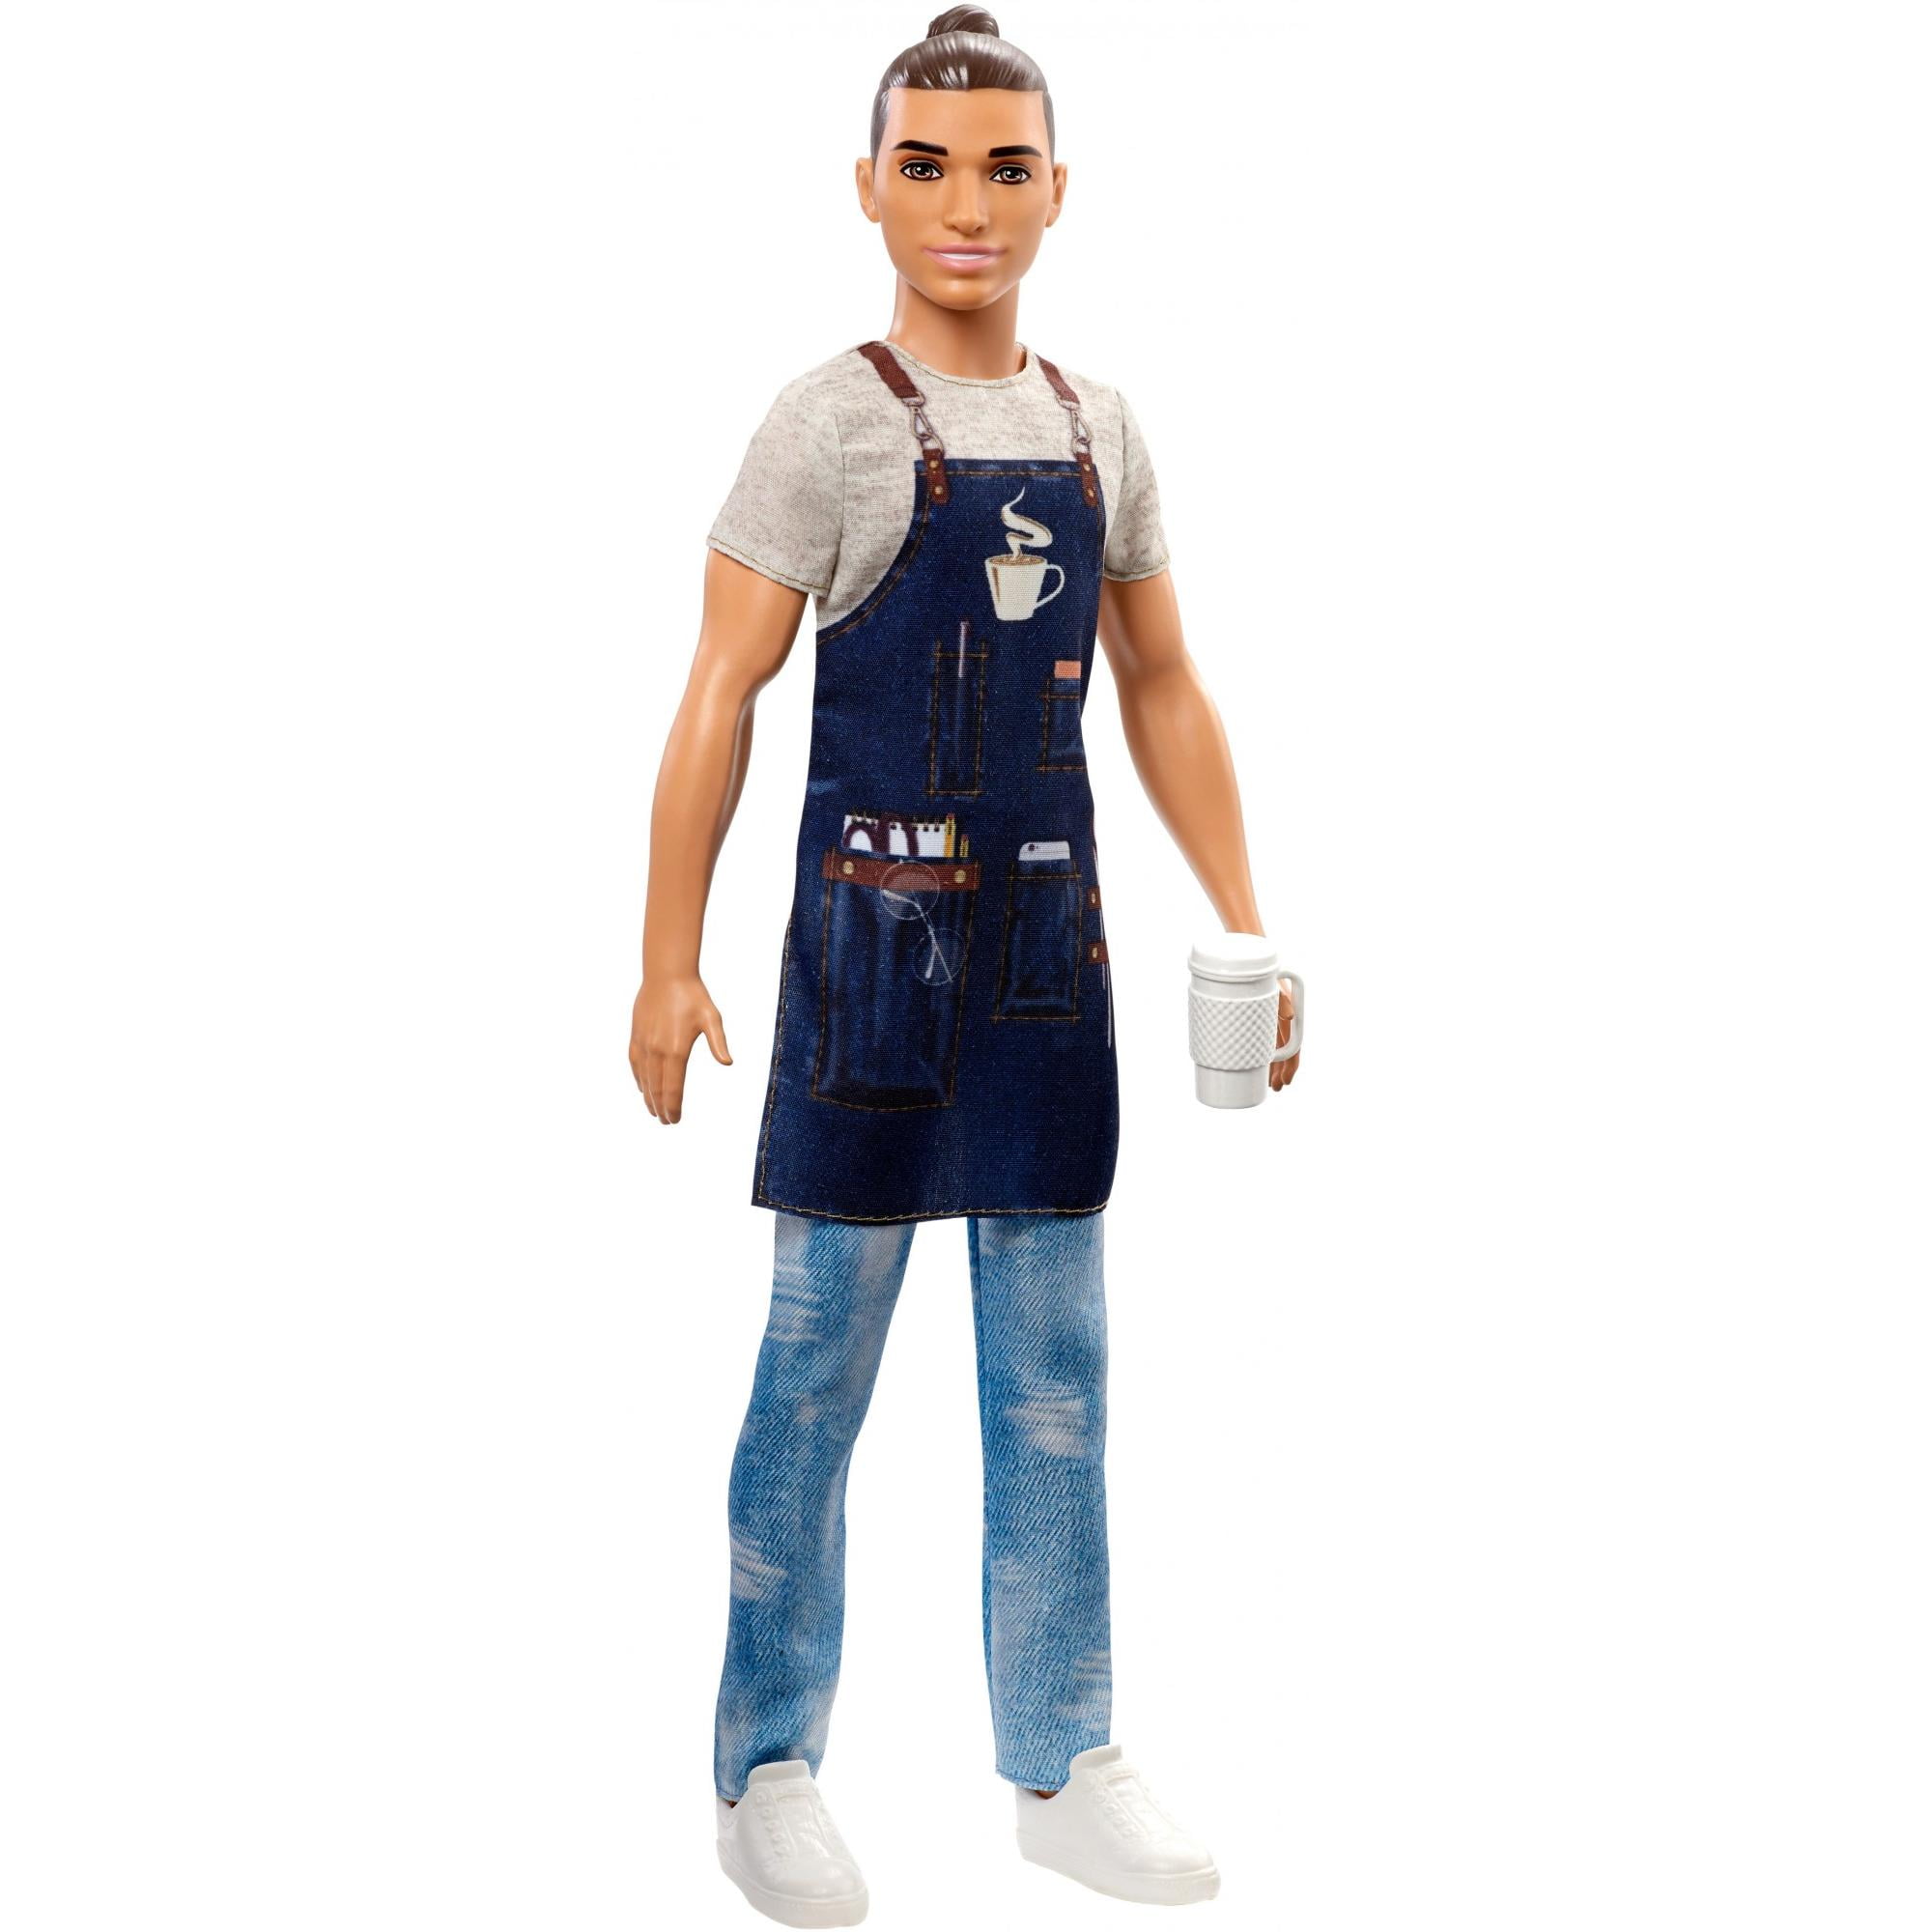 Barista Doll Details about   Barbie Career Ken For Kids Age 3-6 Yrs 3.81 x 8.89 x 30.48 cm 